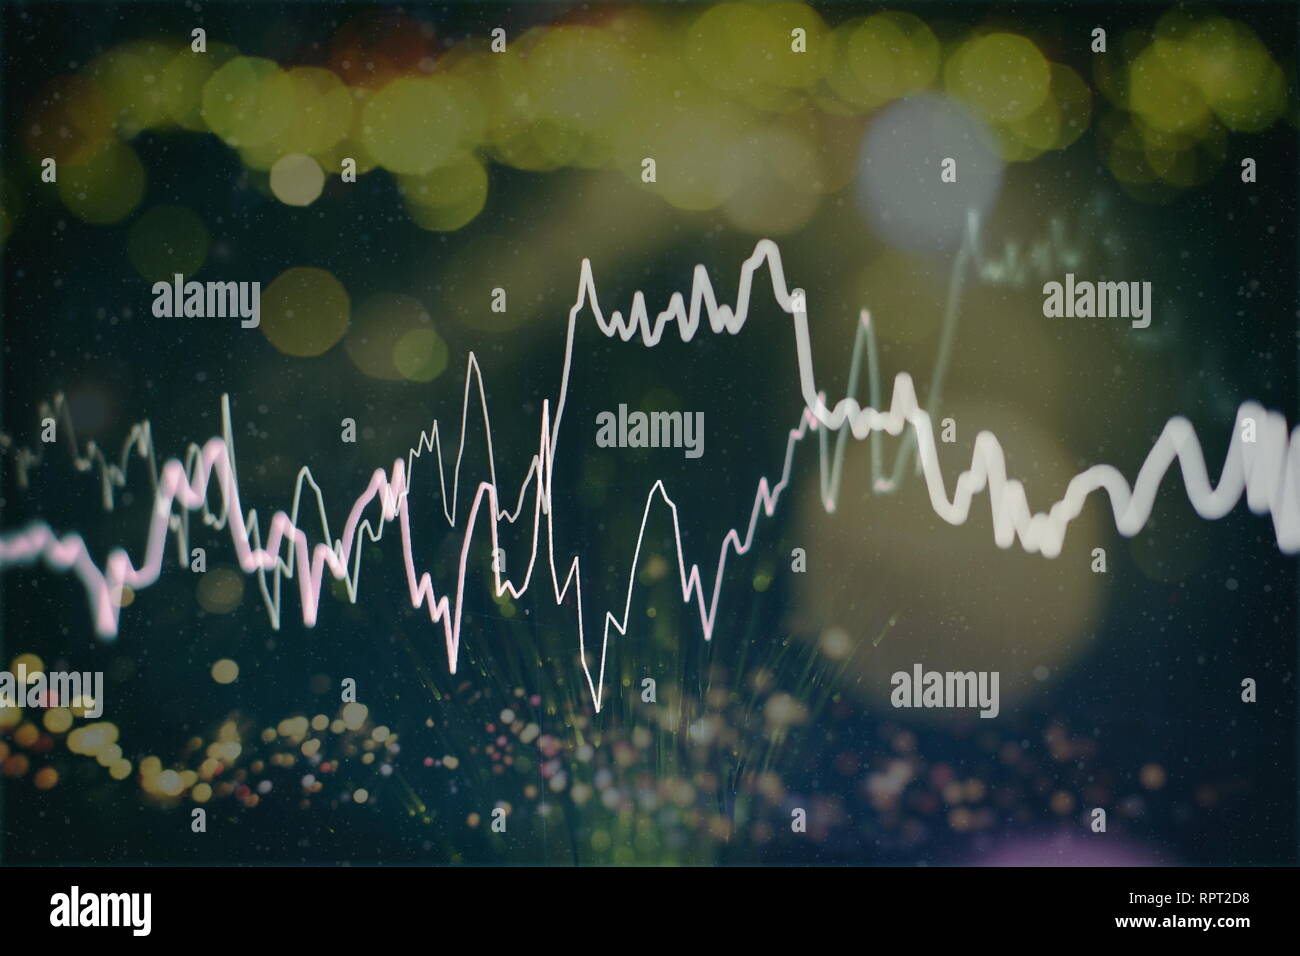 Abstract glowing forex chart interface wallpaper. Investment, trade, stock, finance and analysis concept. Stock Photo